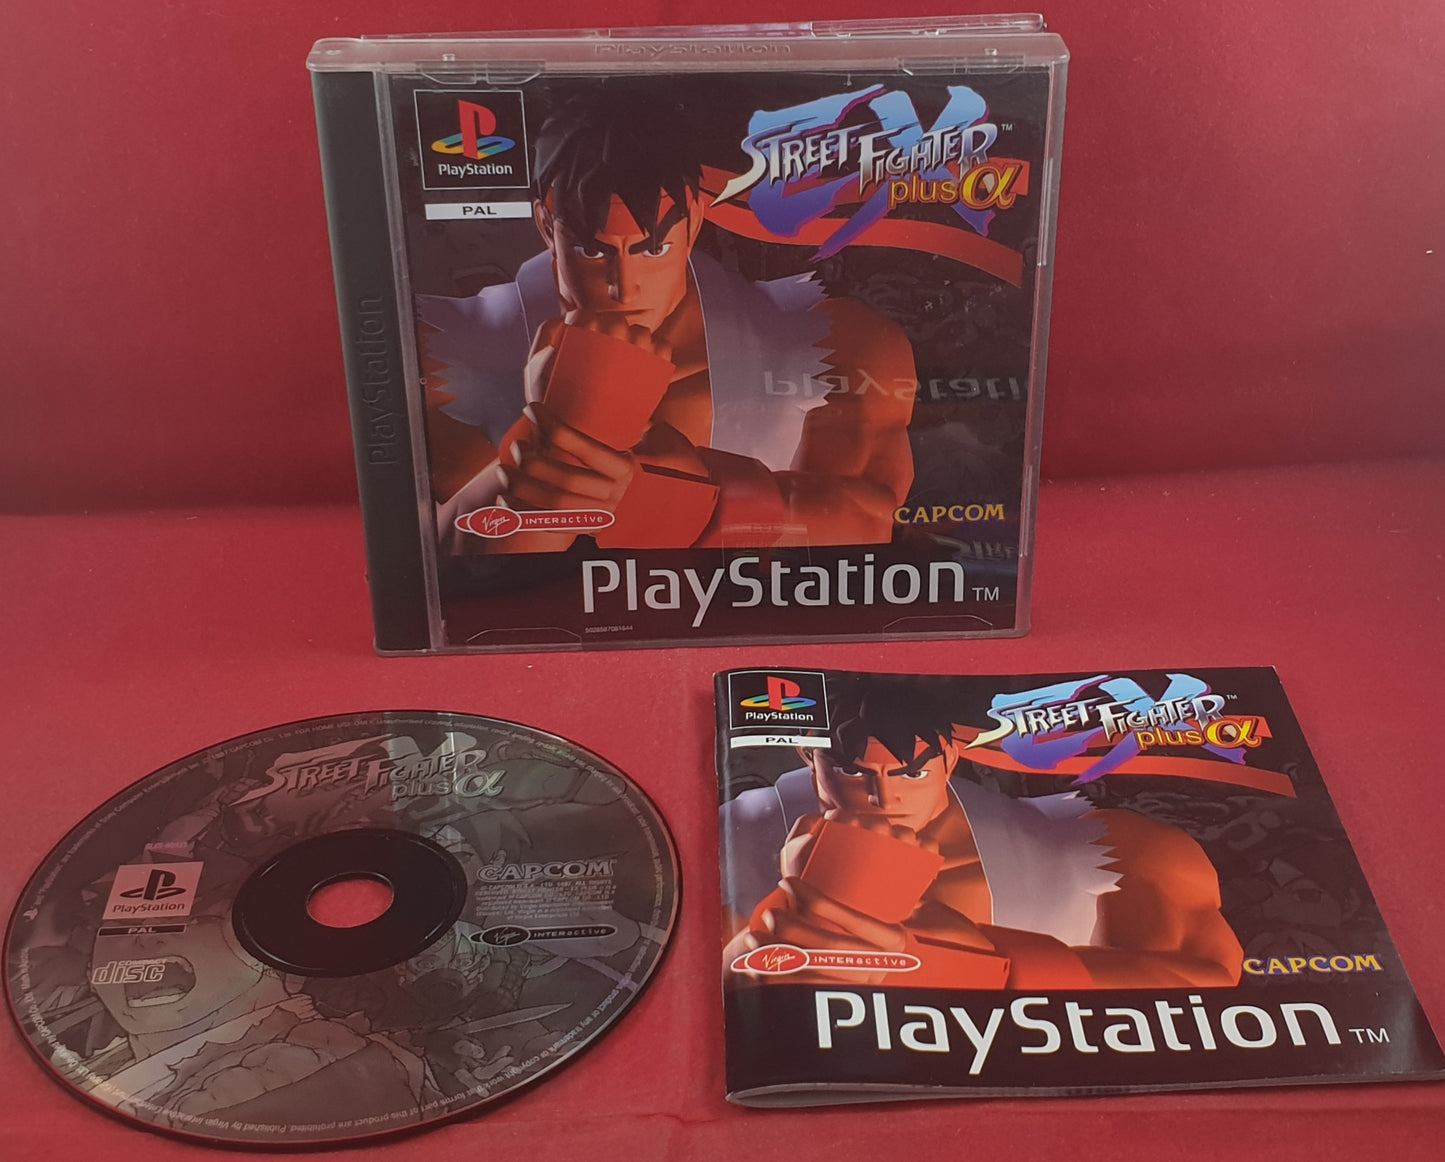 Street Fighter Ex Plus a Black Label Sony Playstation 1 (PS1) RARE Game